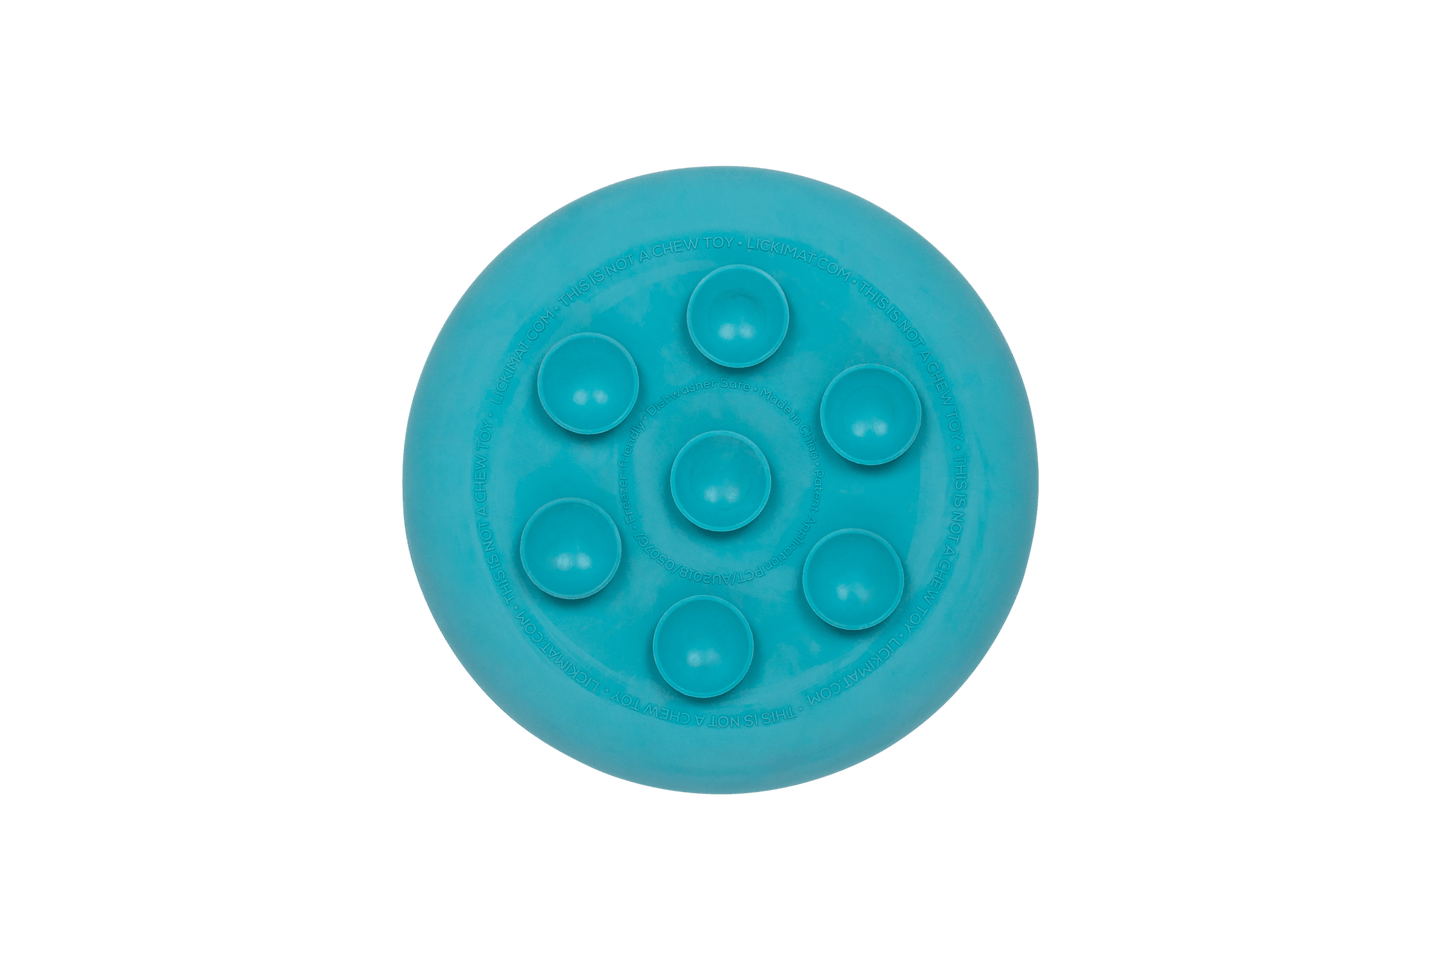 A turquoise rubber bowl back with suction cups at the back.